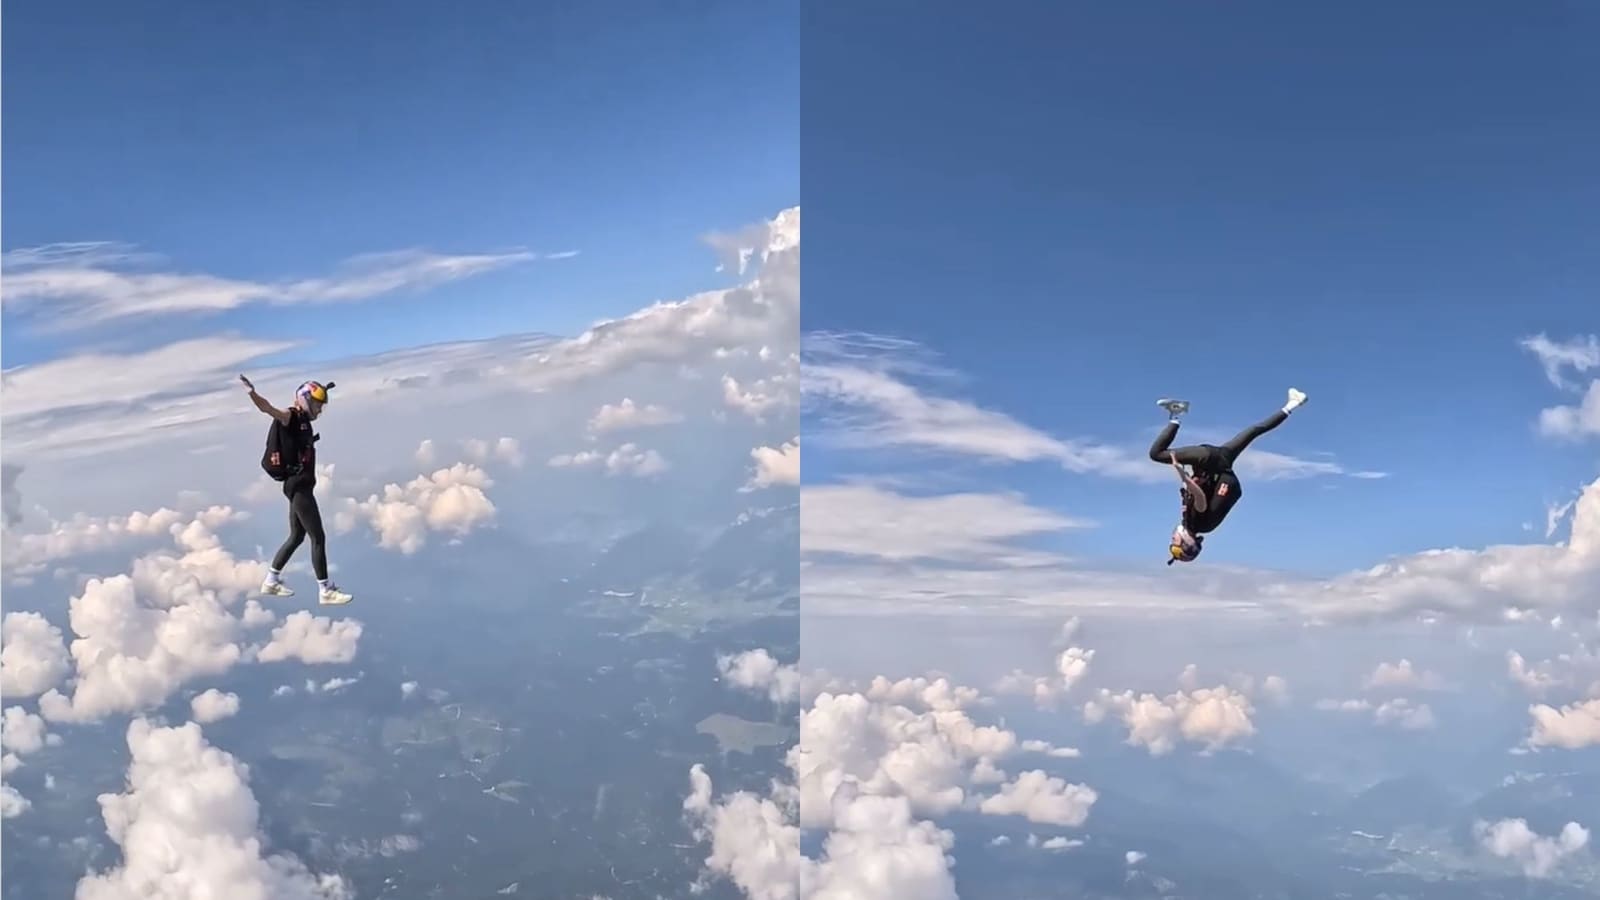 Woman’s stunts while skydiving leave people in disbelief. Old video goes viral